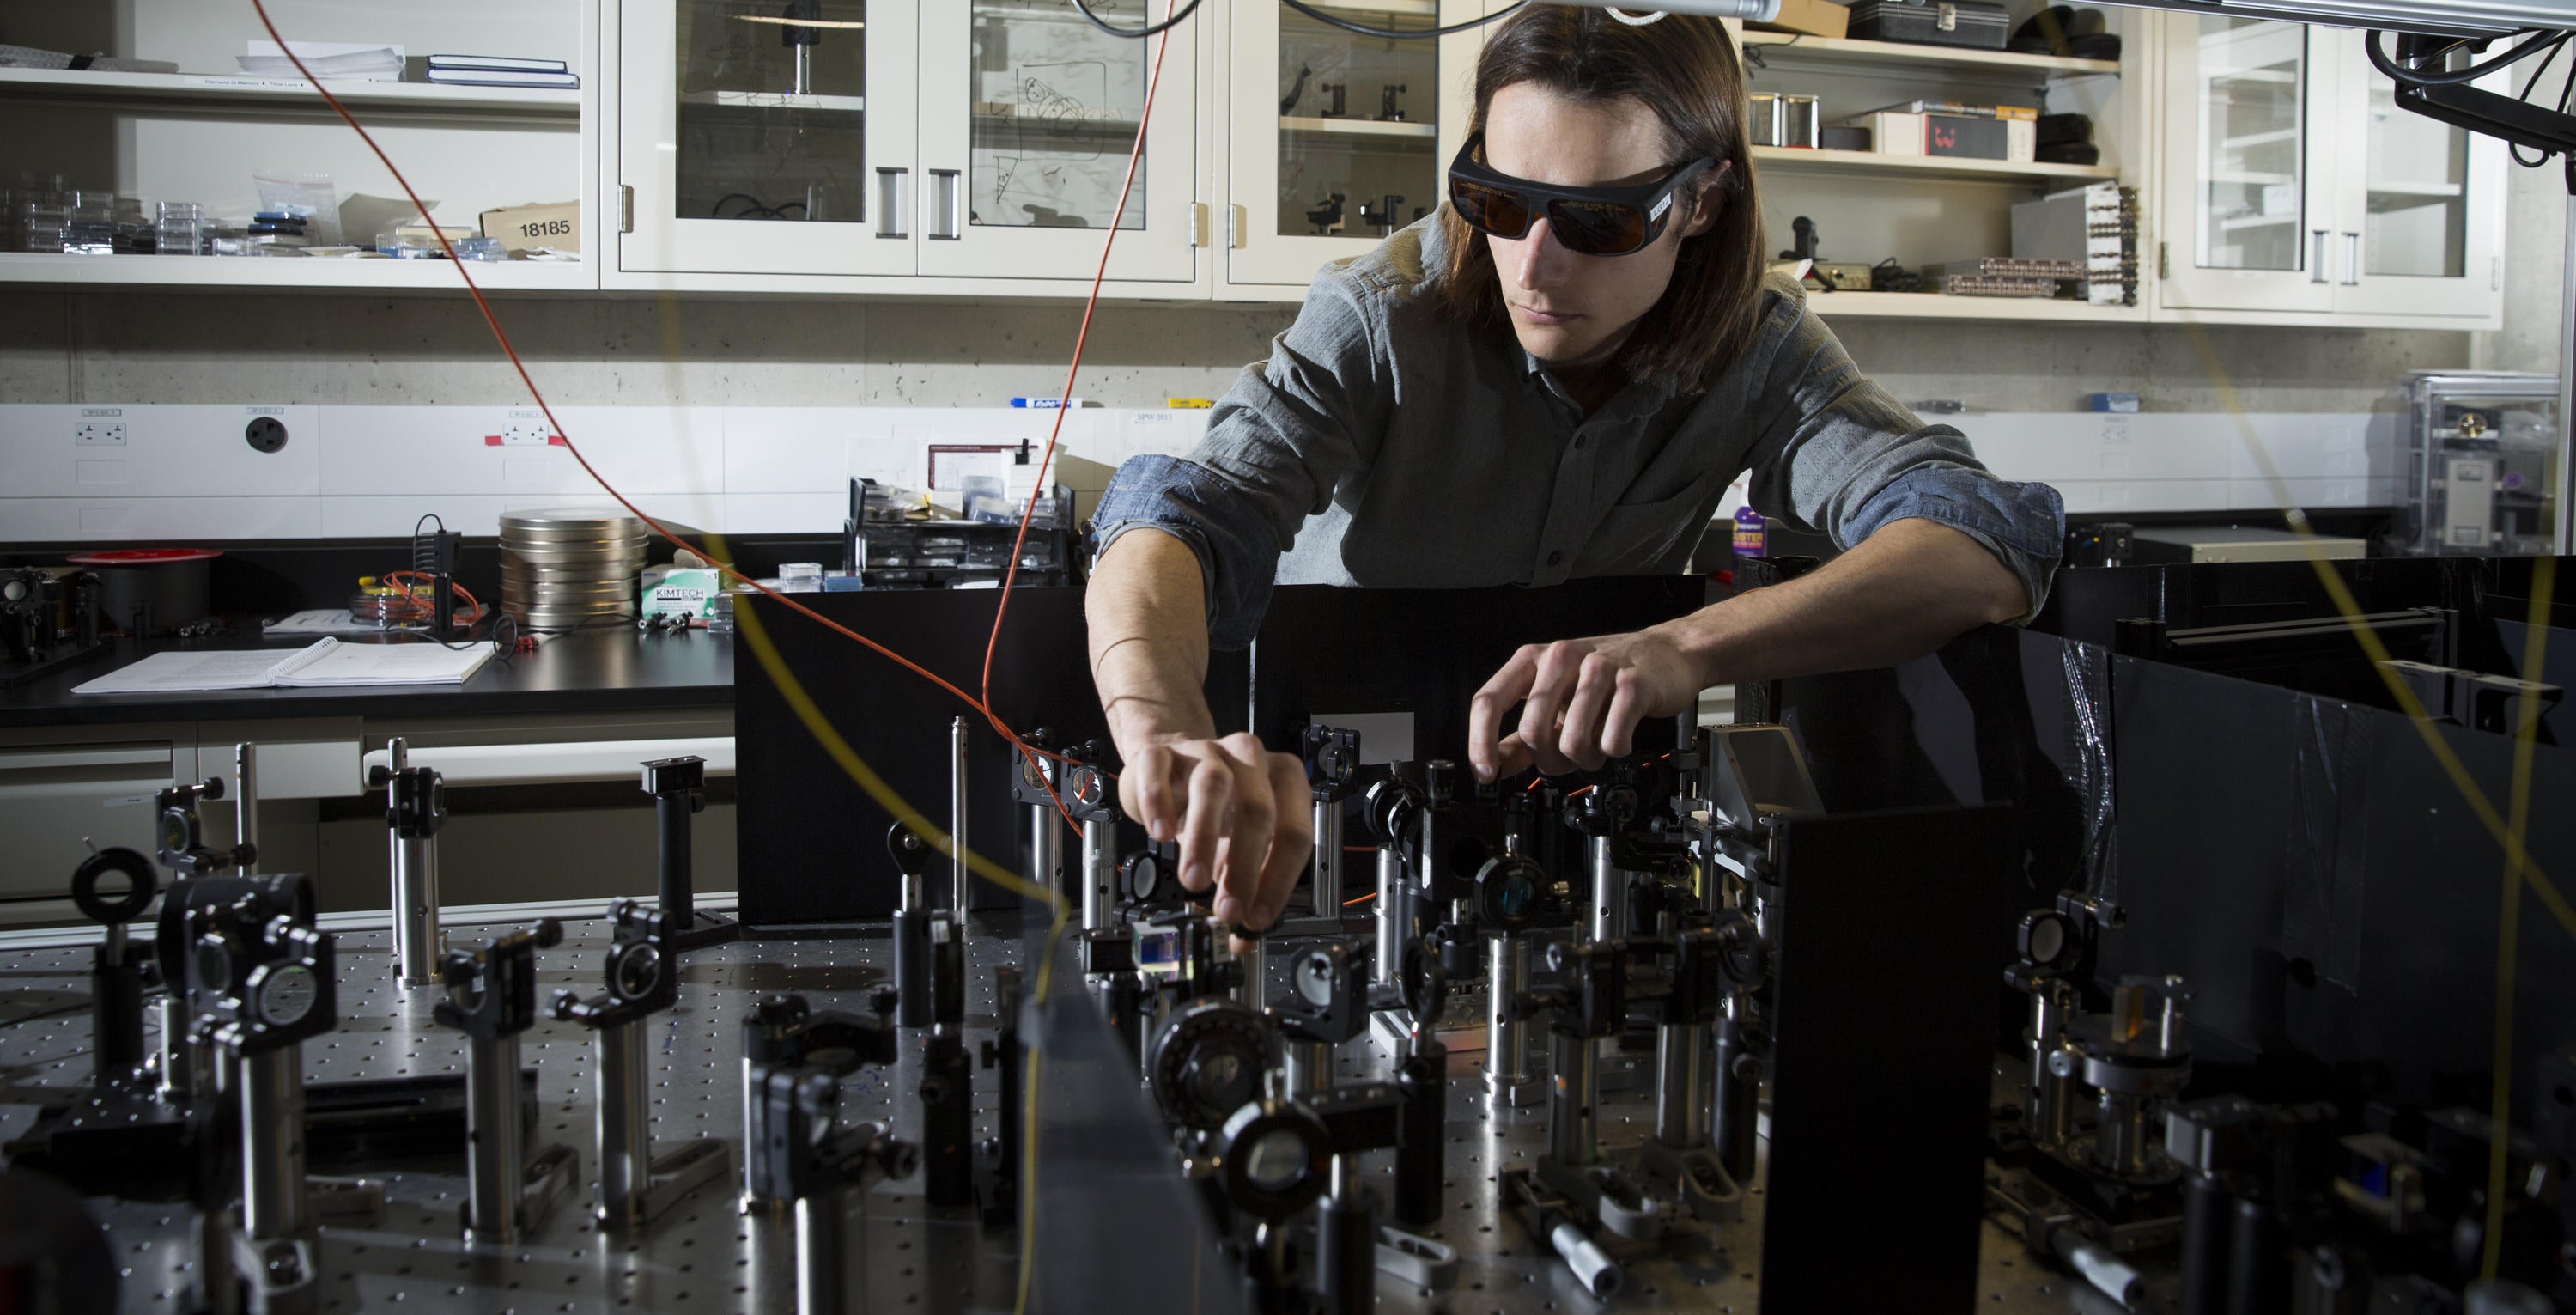 Jean-Philippe MacLean works on his optics experiment